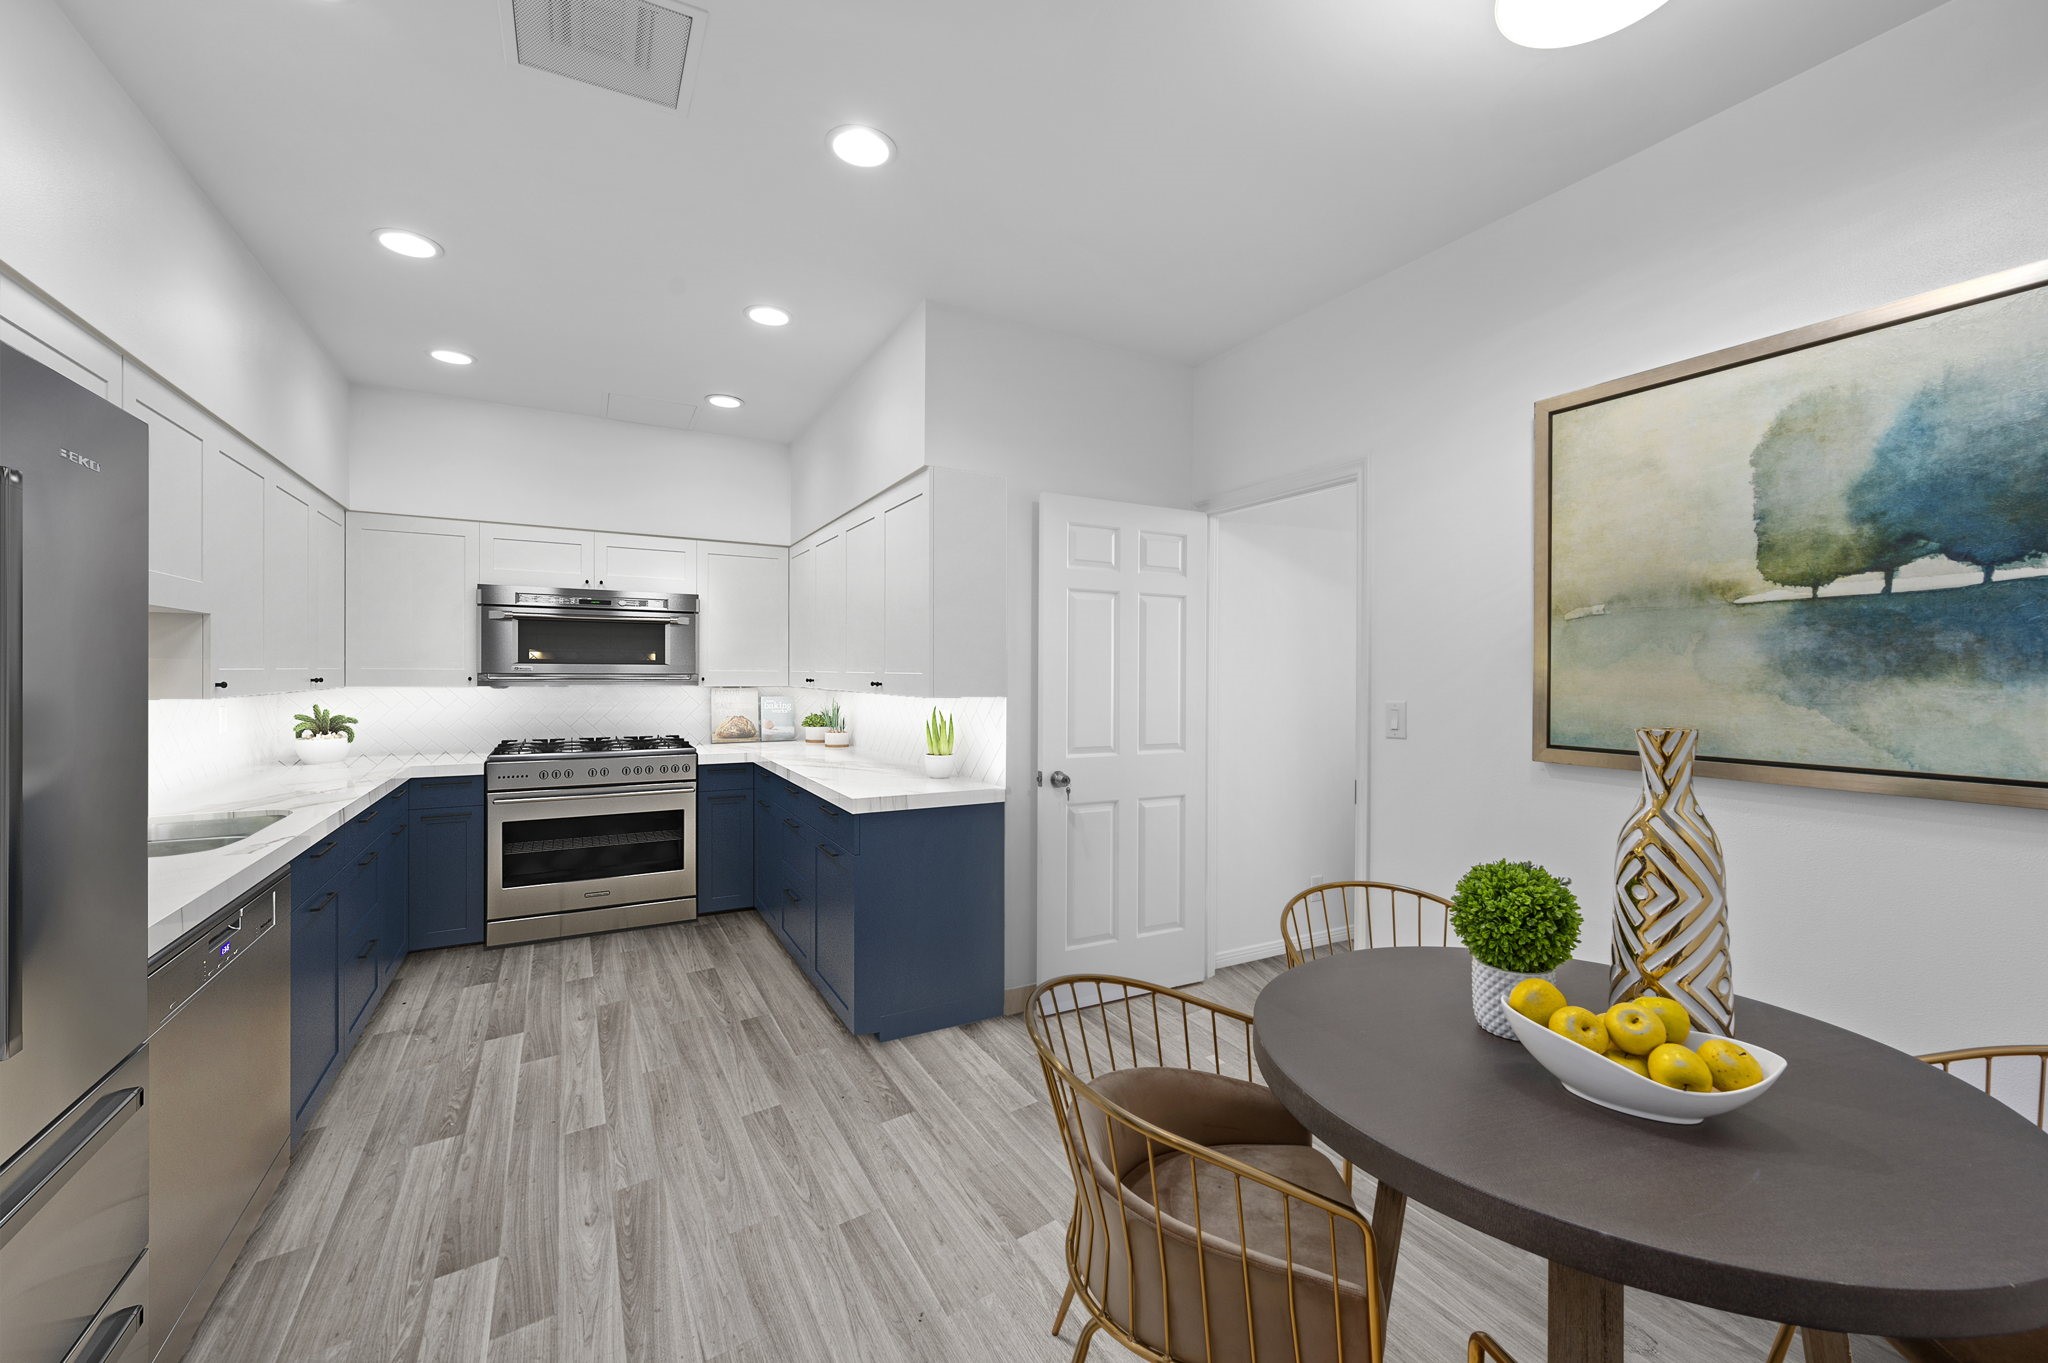 Virtual rendering of alternative options to finishes in wet bar area.